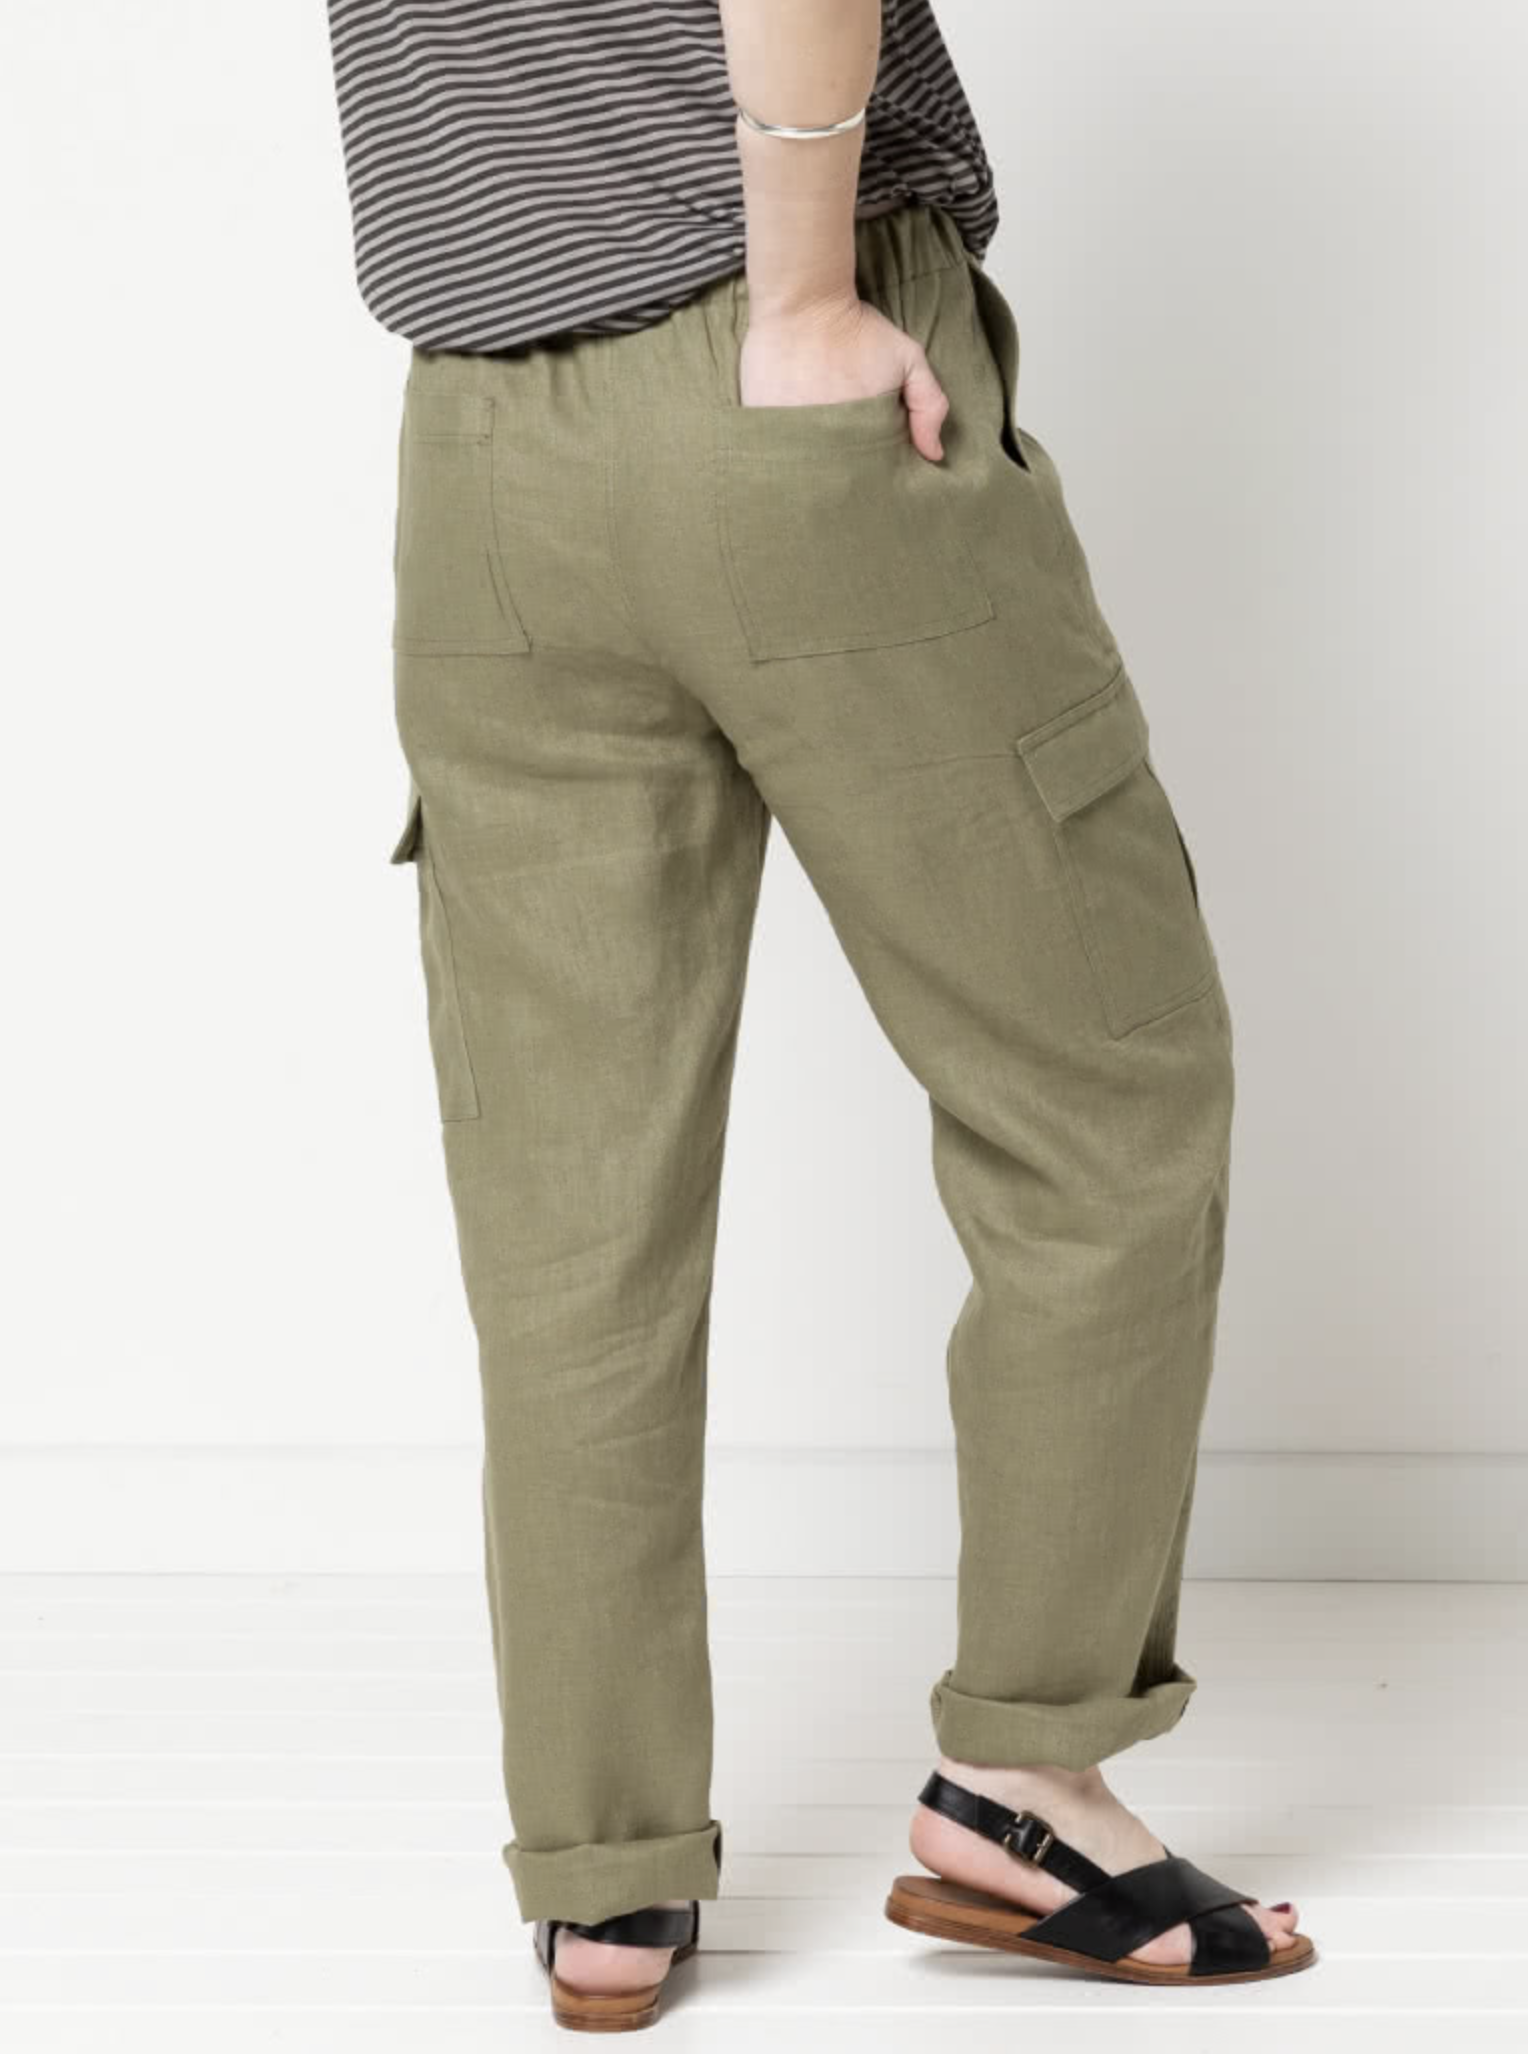 Style Arc Delta Cargo Pant - The Fold Line